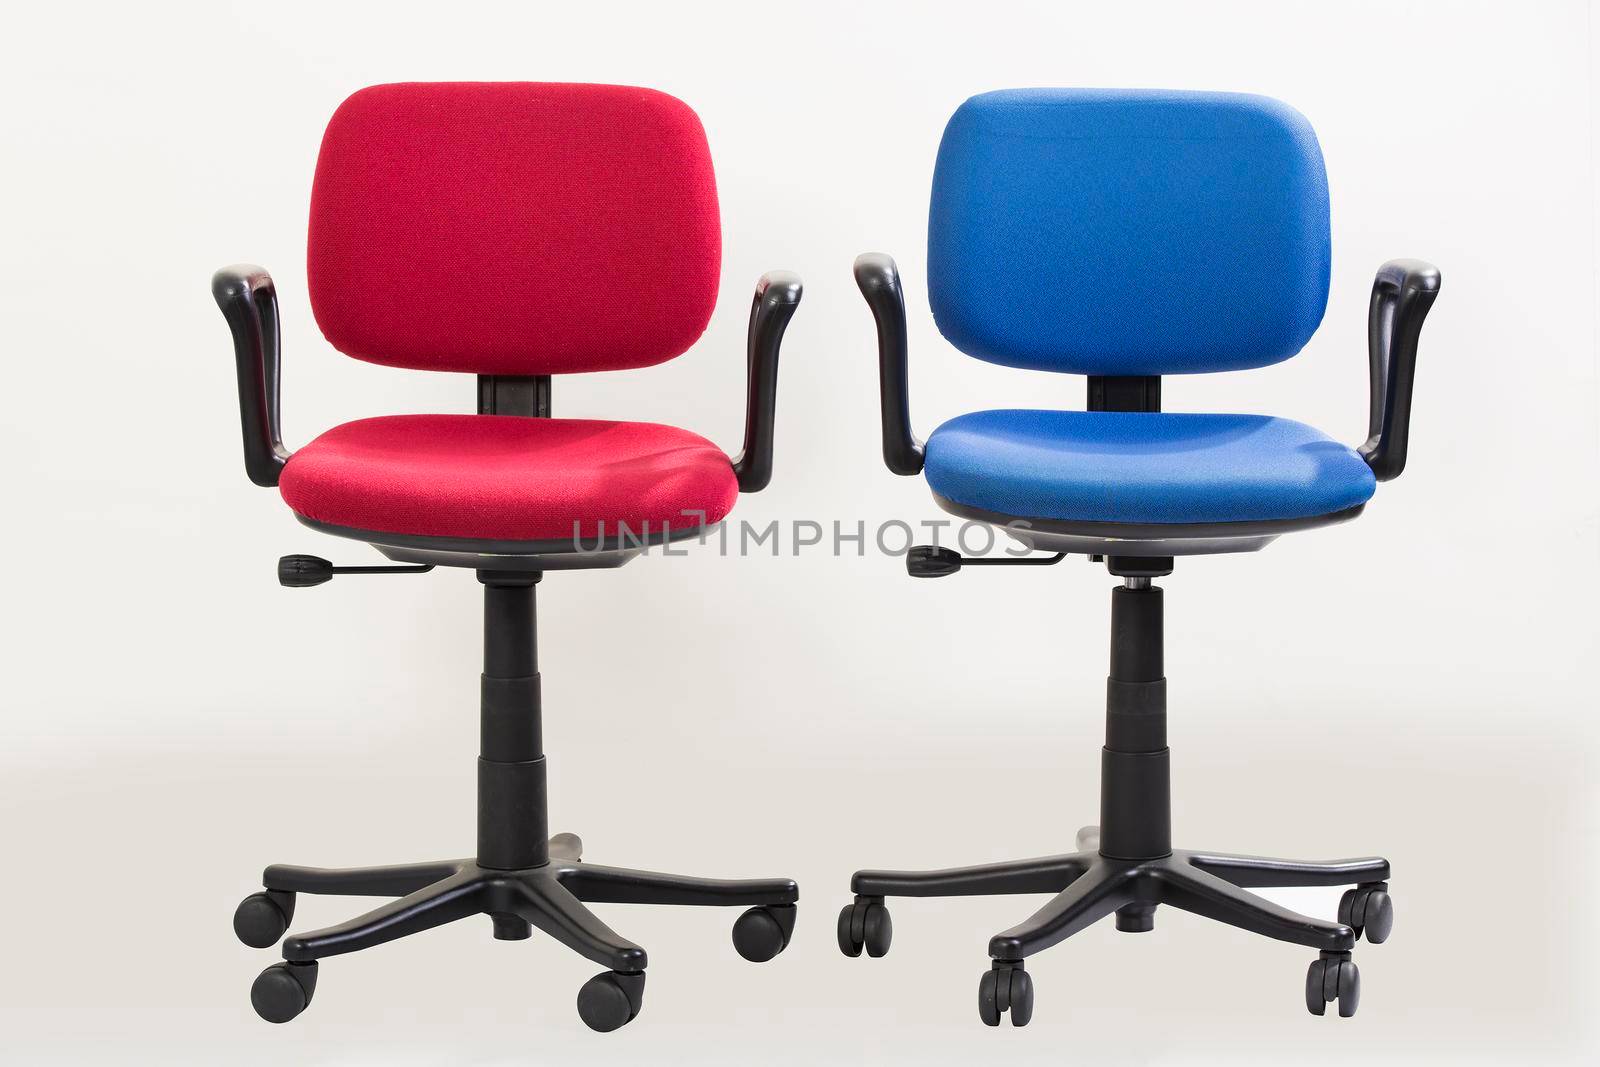 Office chair on white background